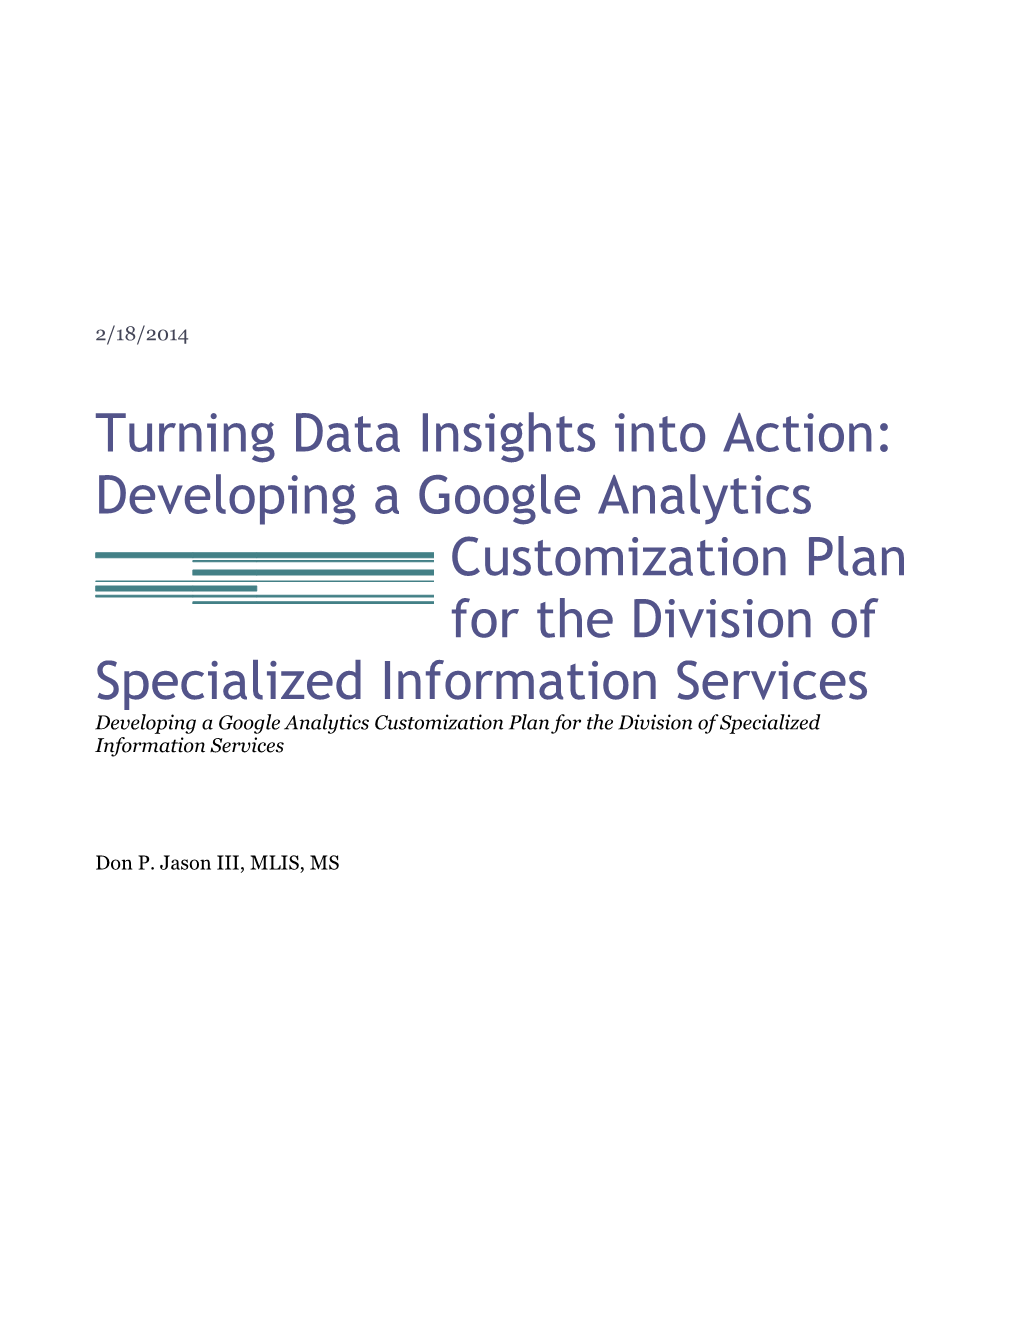 Turning Data Insights Into Action: Developing a Google Analytics Customization Plan For